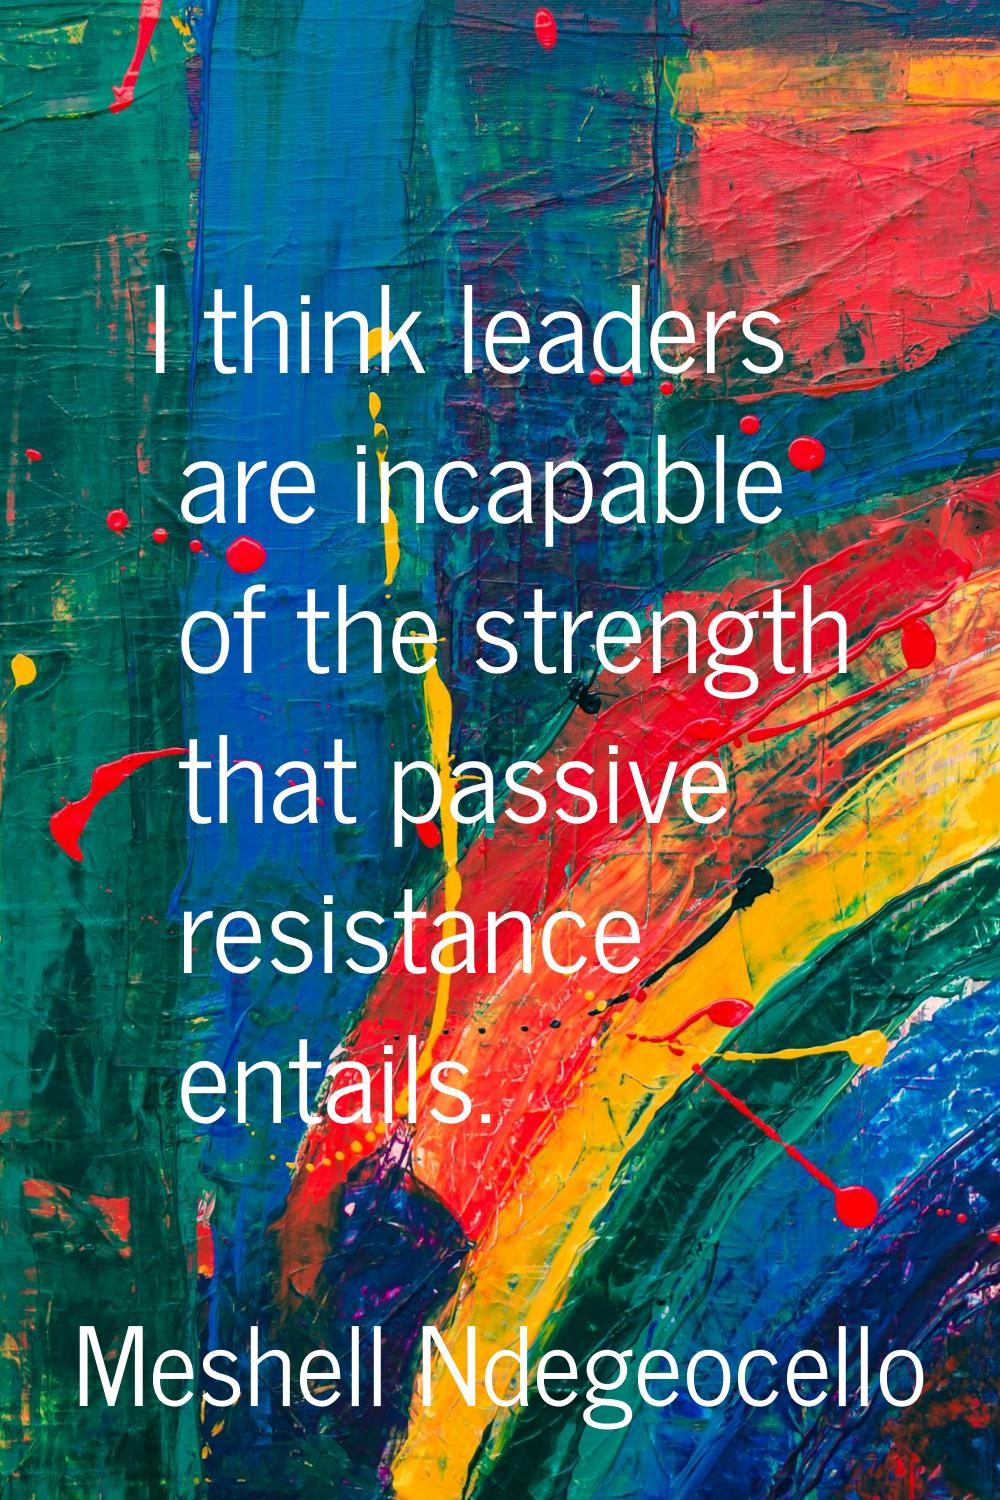 I think leaders are incapable of the strength that passive resistance entails.